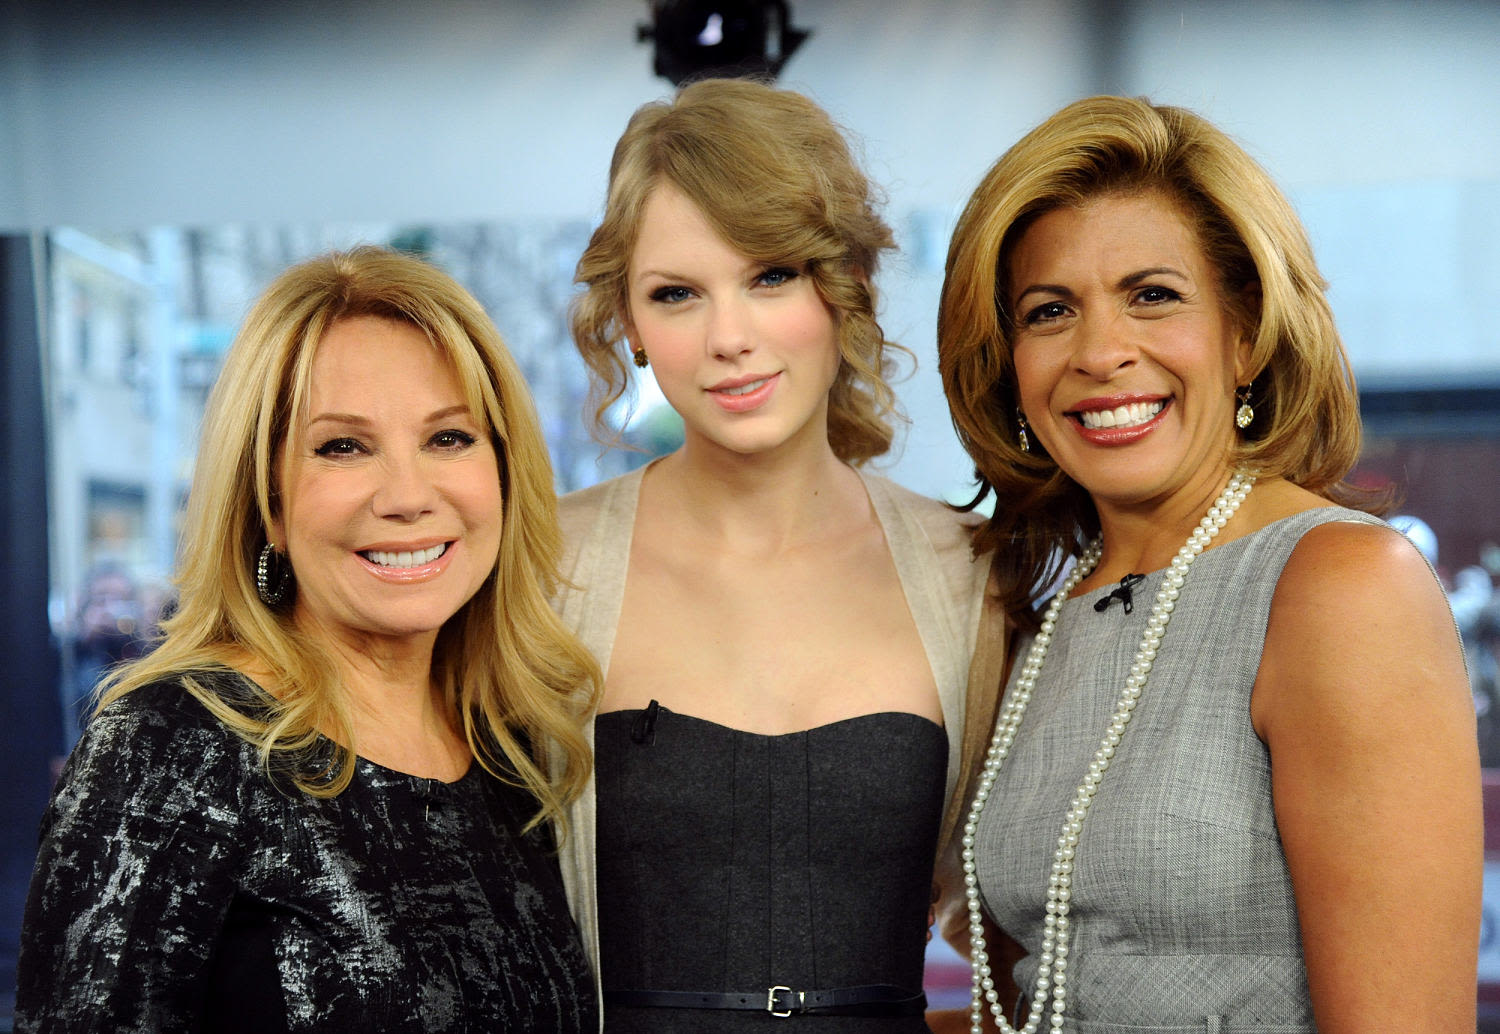 Hoda Kotb recalls the first time she met Taylor Swift: ‘Polite and in charge’